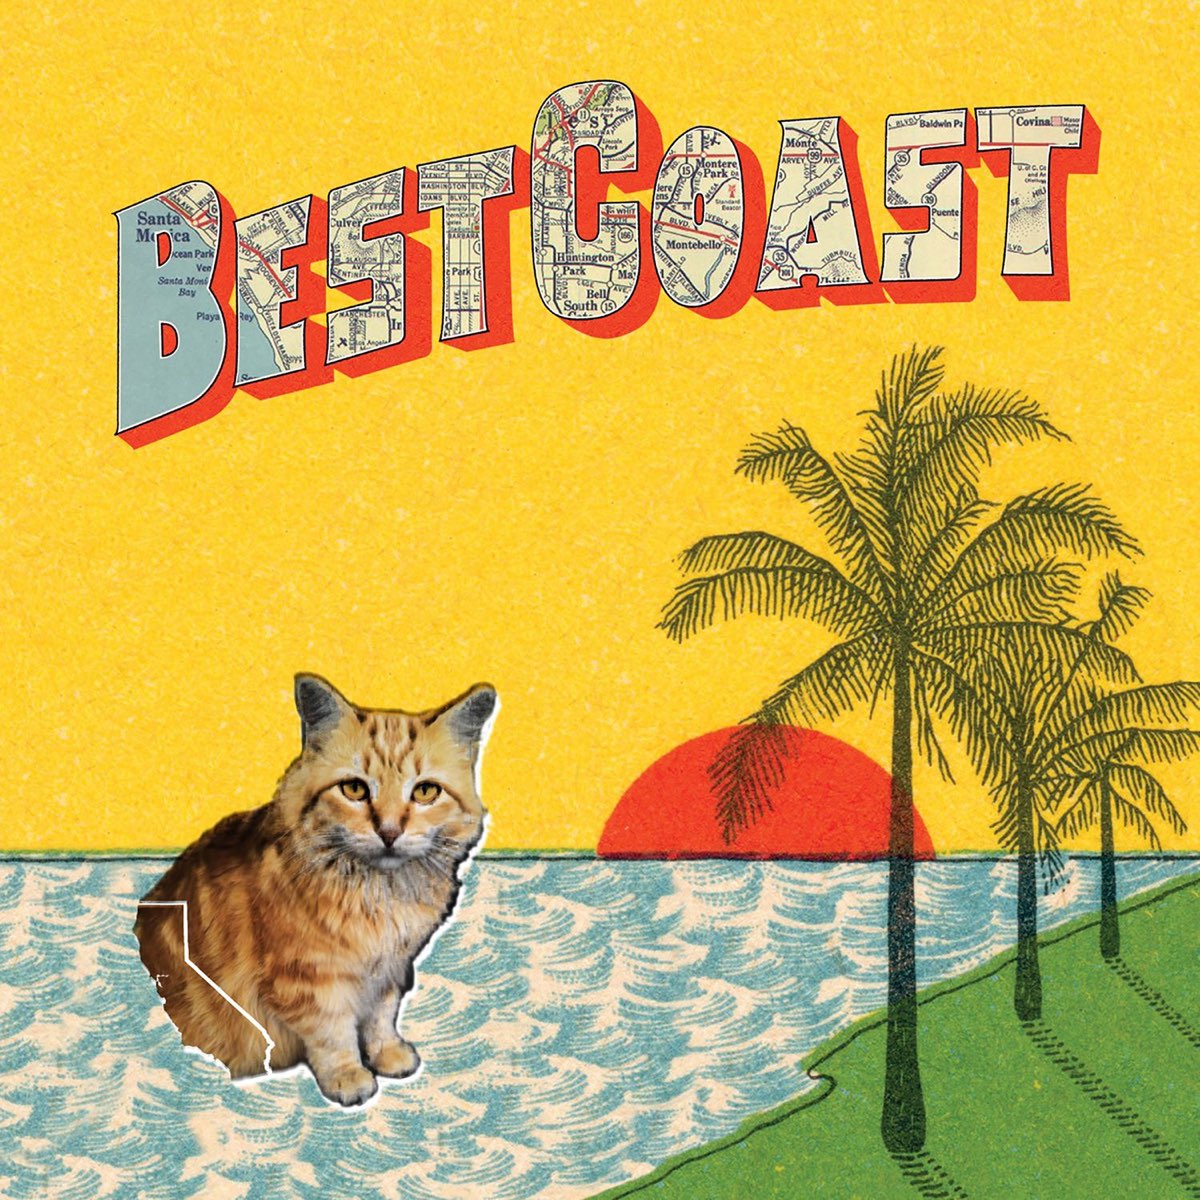 BEST COAST - Crazy for you